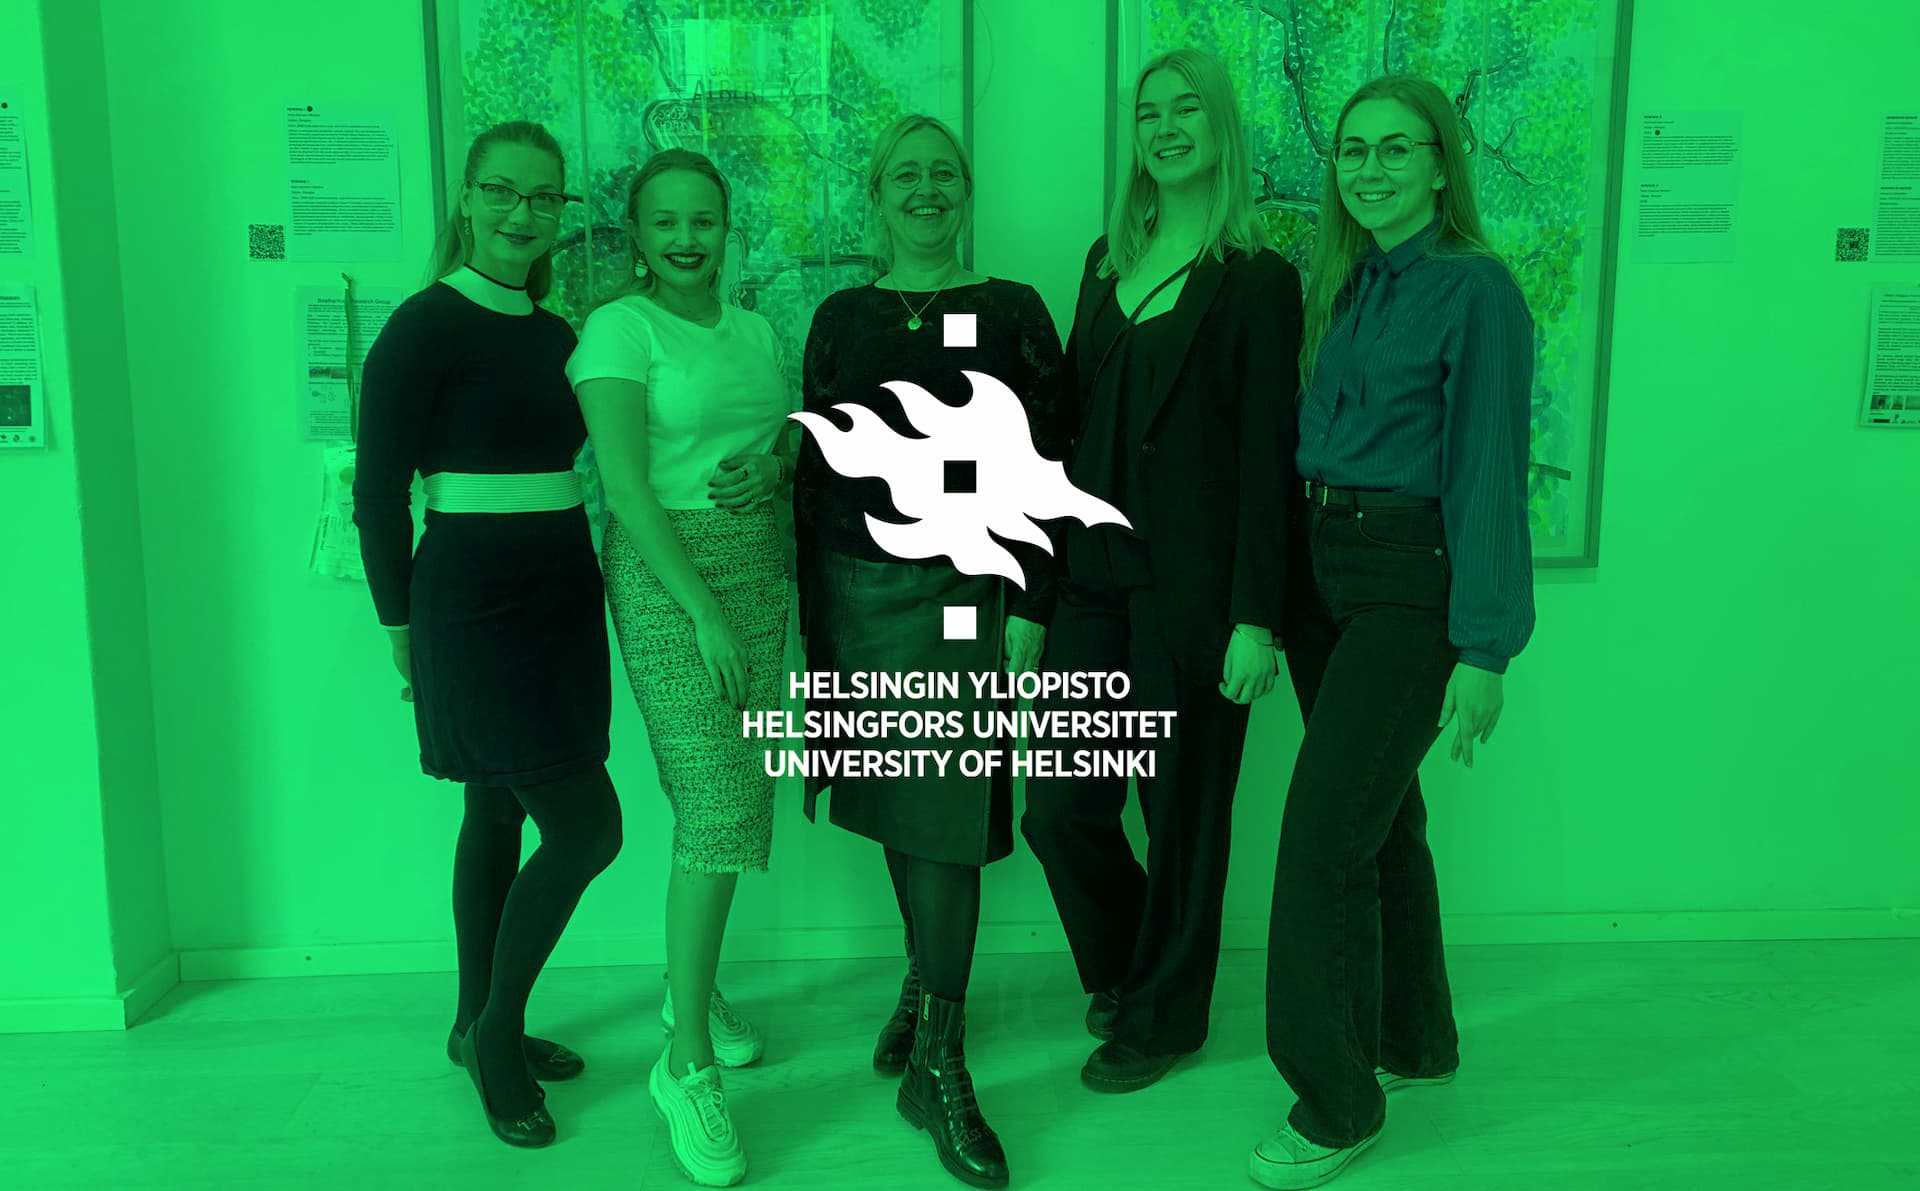 Helsinki University drug research group with logo on top.